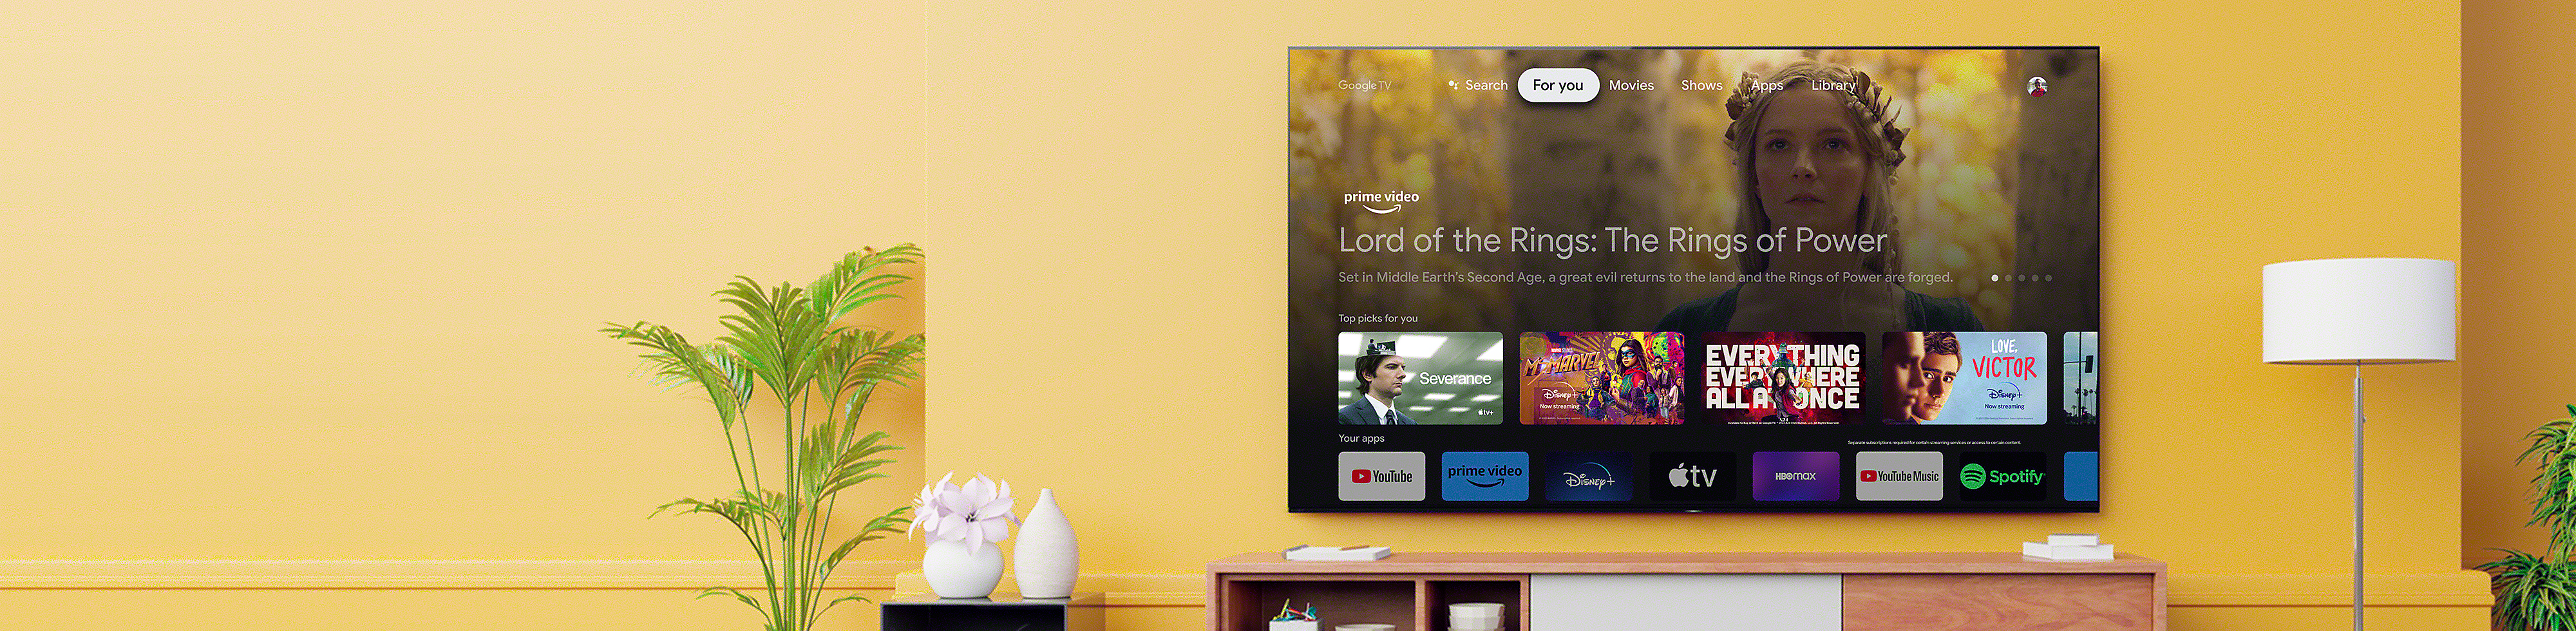 Living room with a wall-mounted BRAVIA TV displaying an array of entertainment apps and streaming services